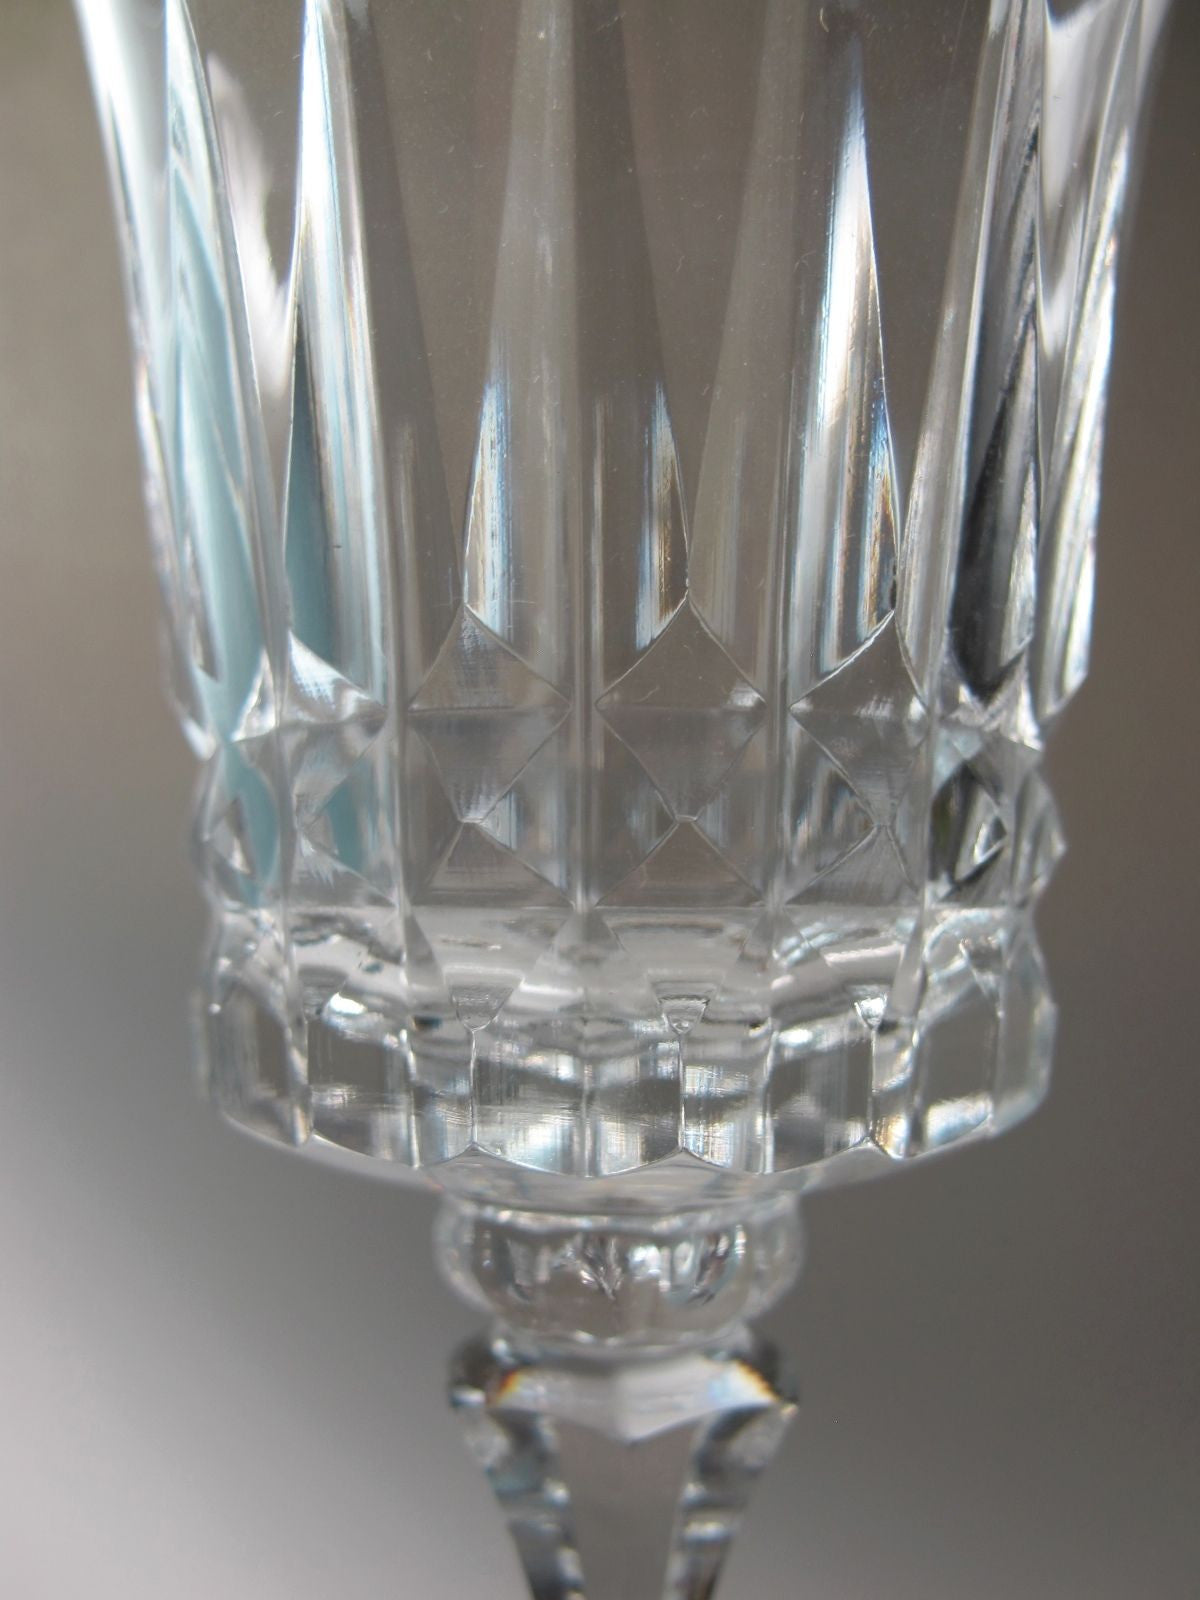 Lenox Cut glass Gala Crystal wine  Made in USA Mt Pleasant PA mouth blown - O'Rourke crystal awards & gifts abp cut glass